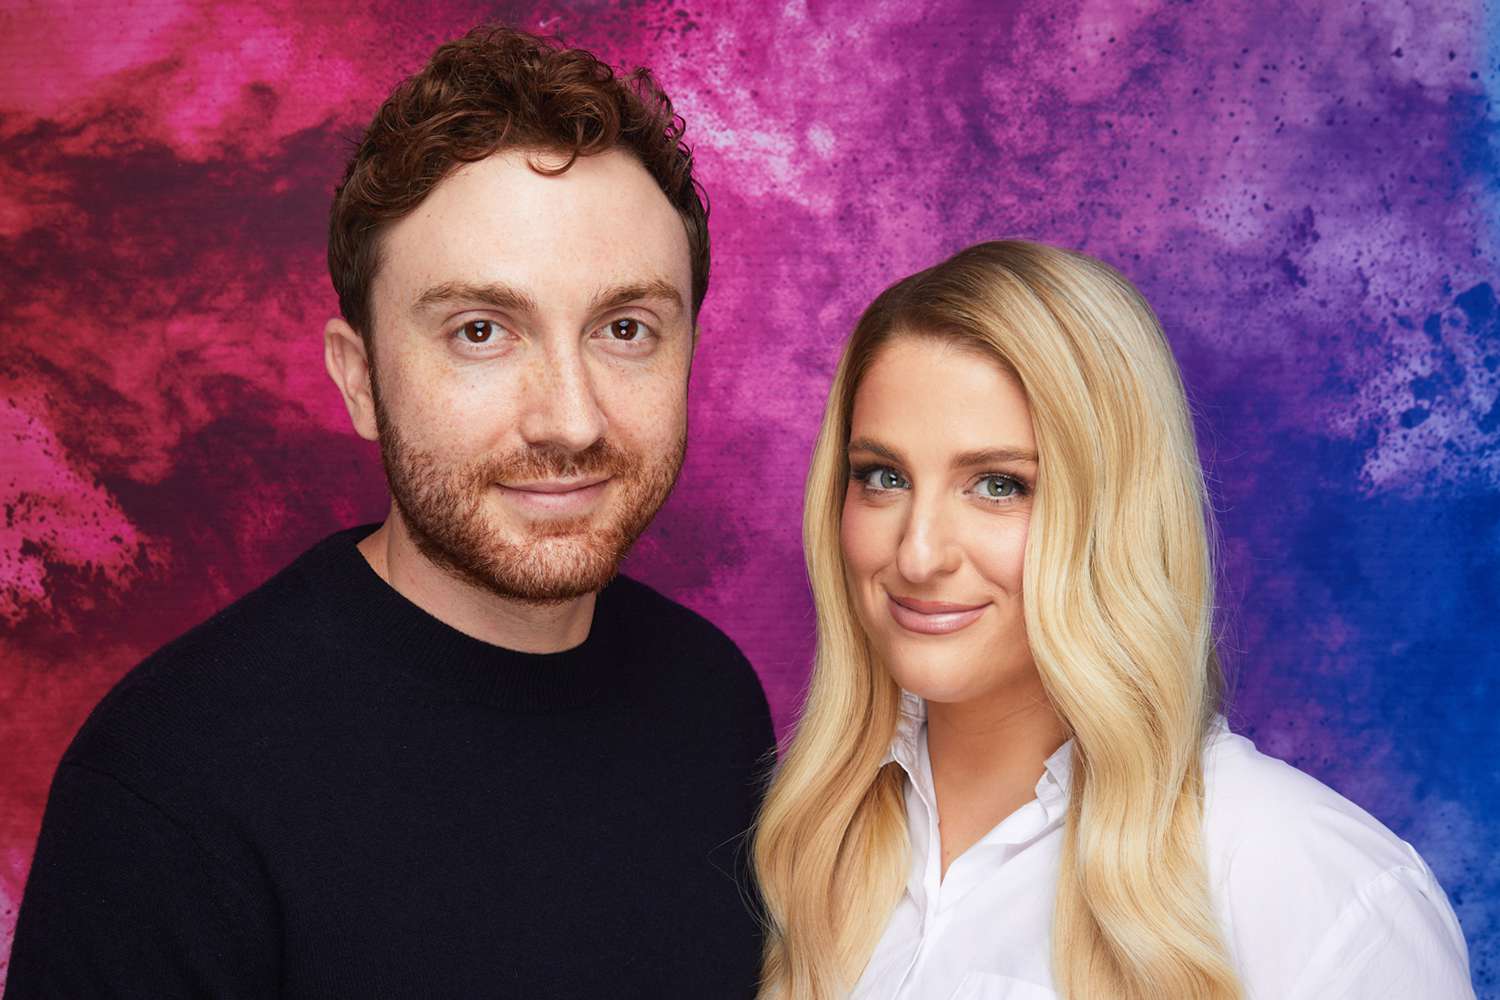 Meghan Trainor’s notorious 2-toilet setup with husband Daryl Sabara will be ‘knees to knees’ in new house